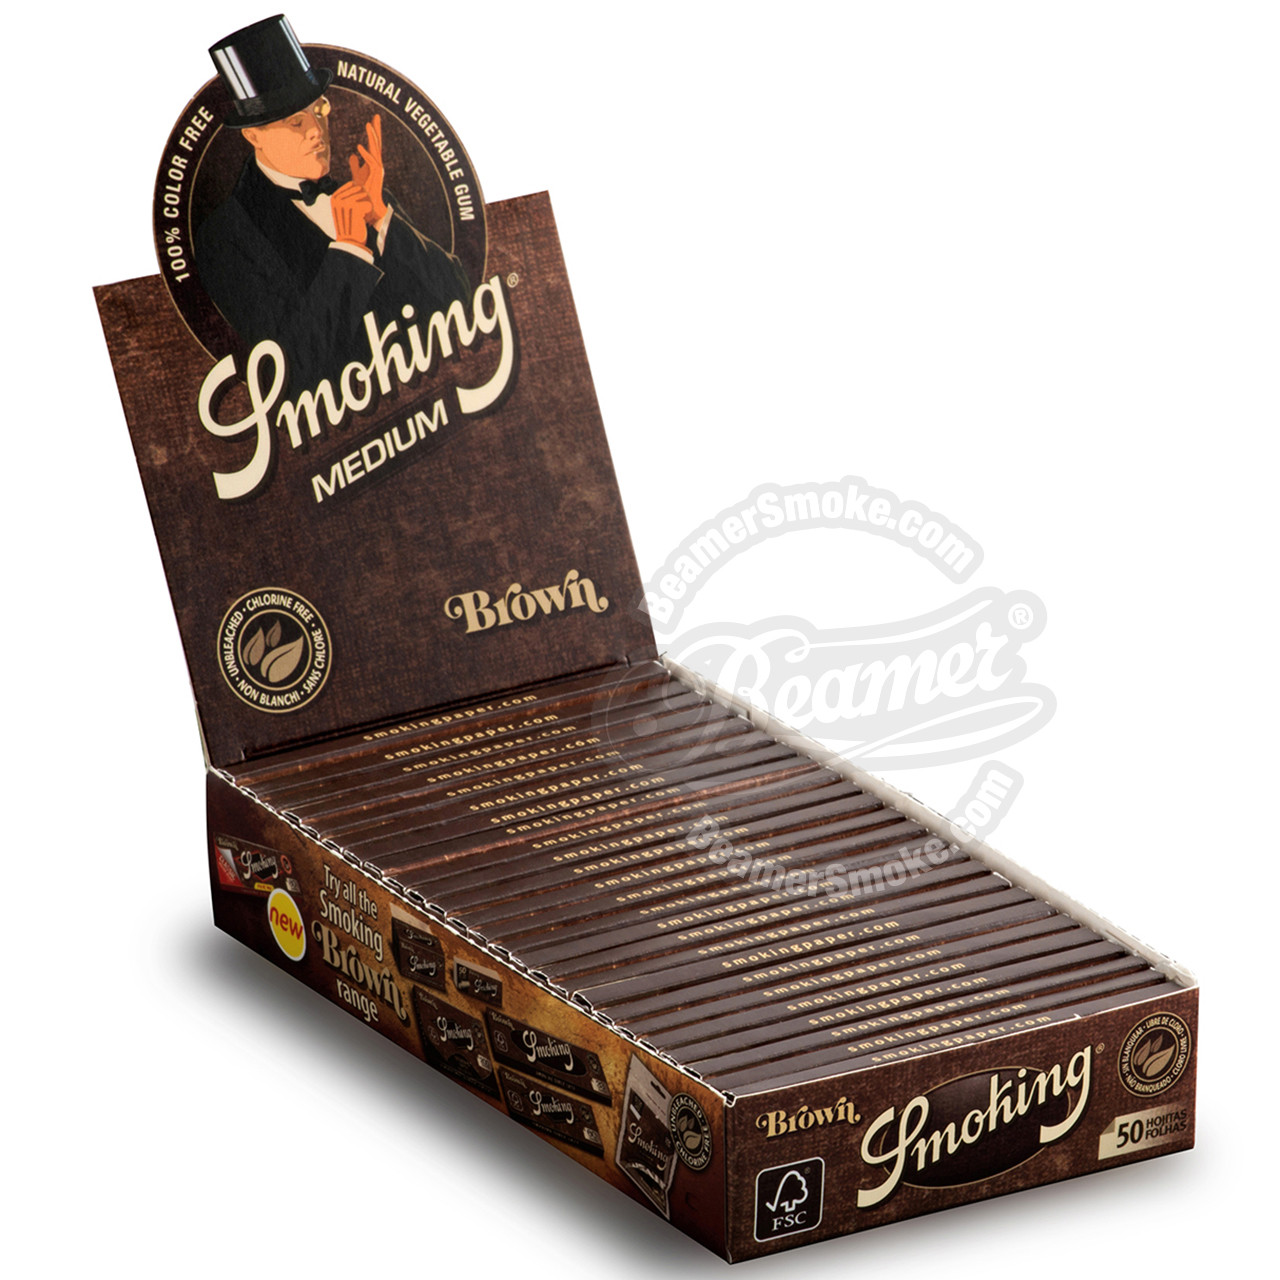  Smoking Brand Rolling Paper - Brown Unbleached - 1 1/4 Full Box  : Health & Household